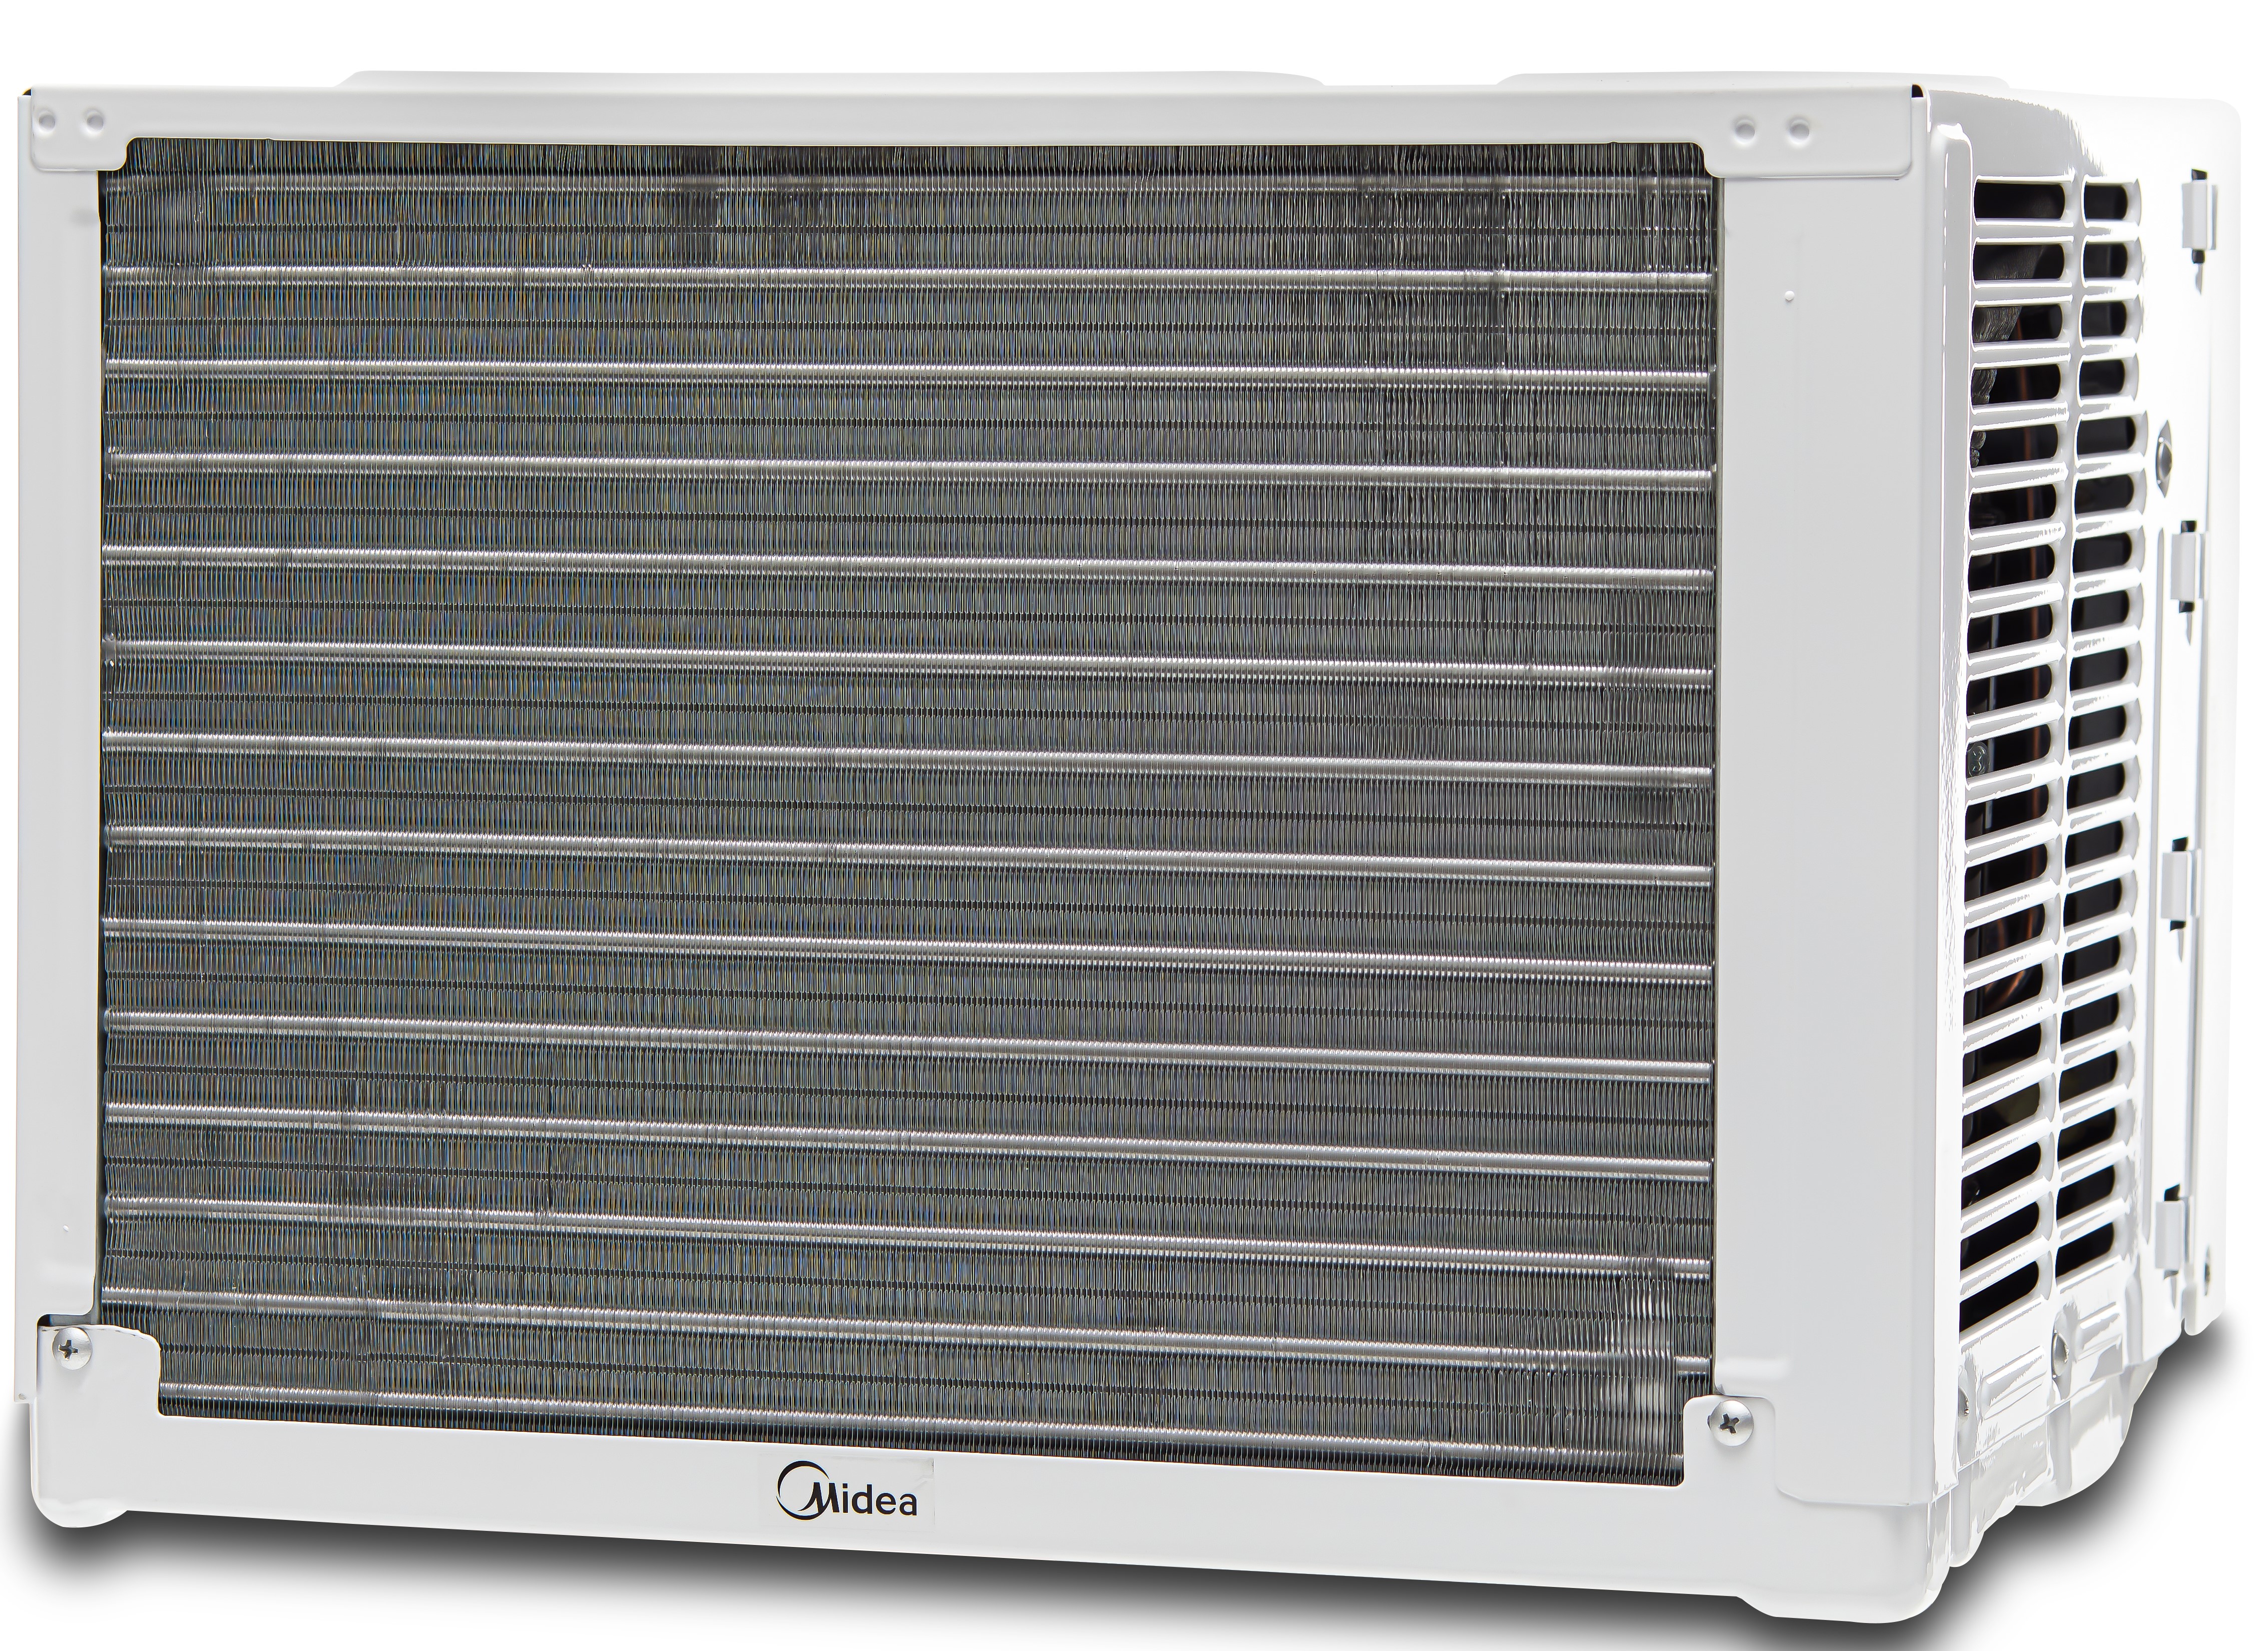 Midea 5,000 BTU 150 Sq Ft Mechanical Window Air Conditioner, White, MAW05M1WWT - image 11 of 17